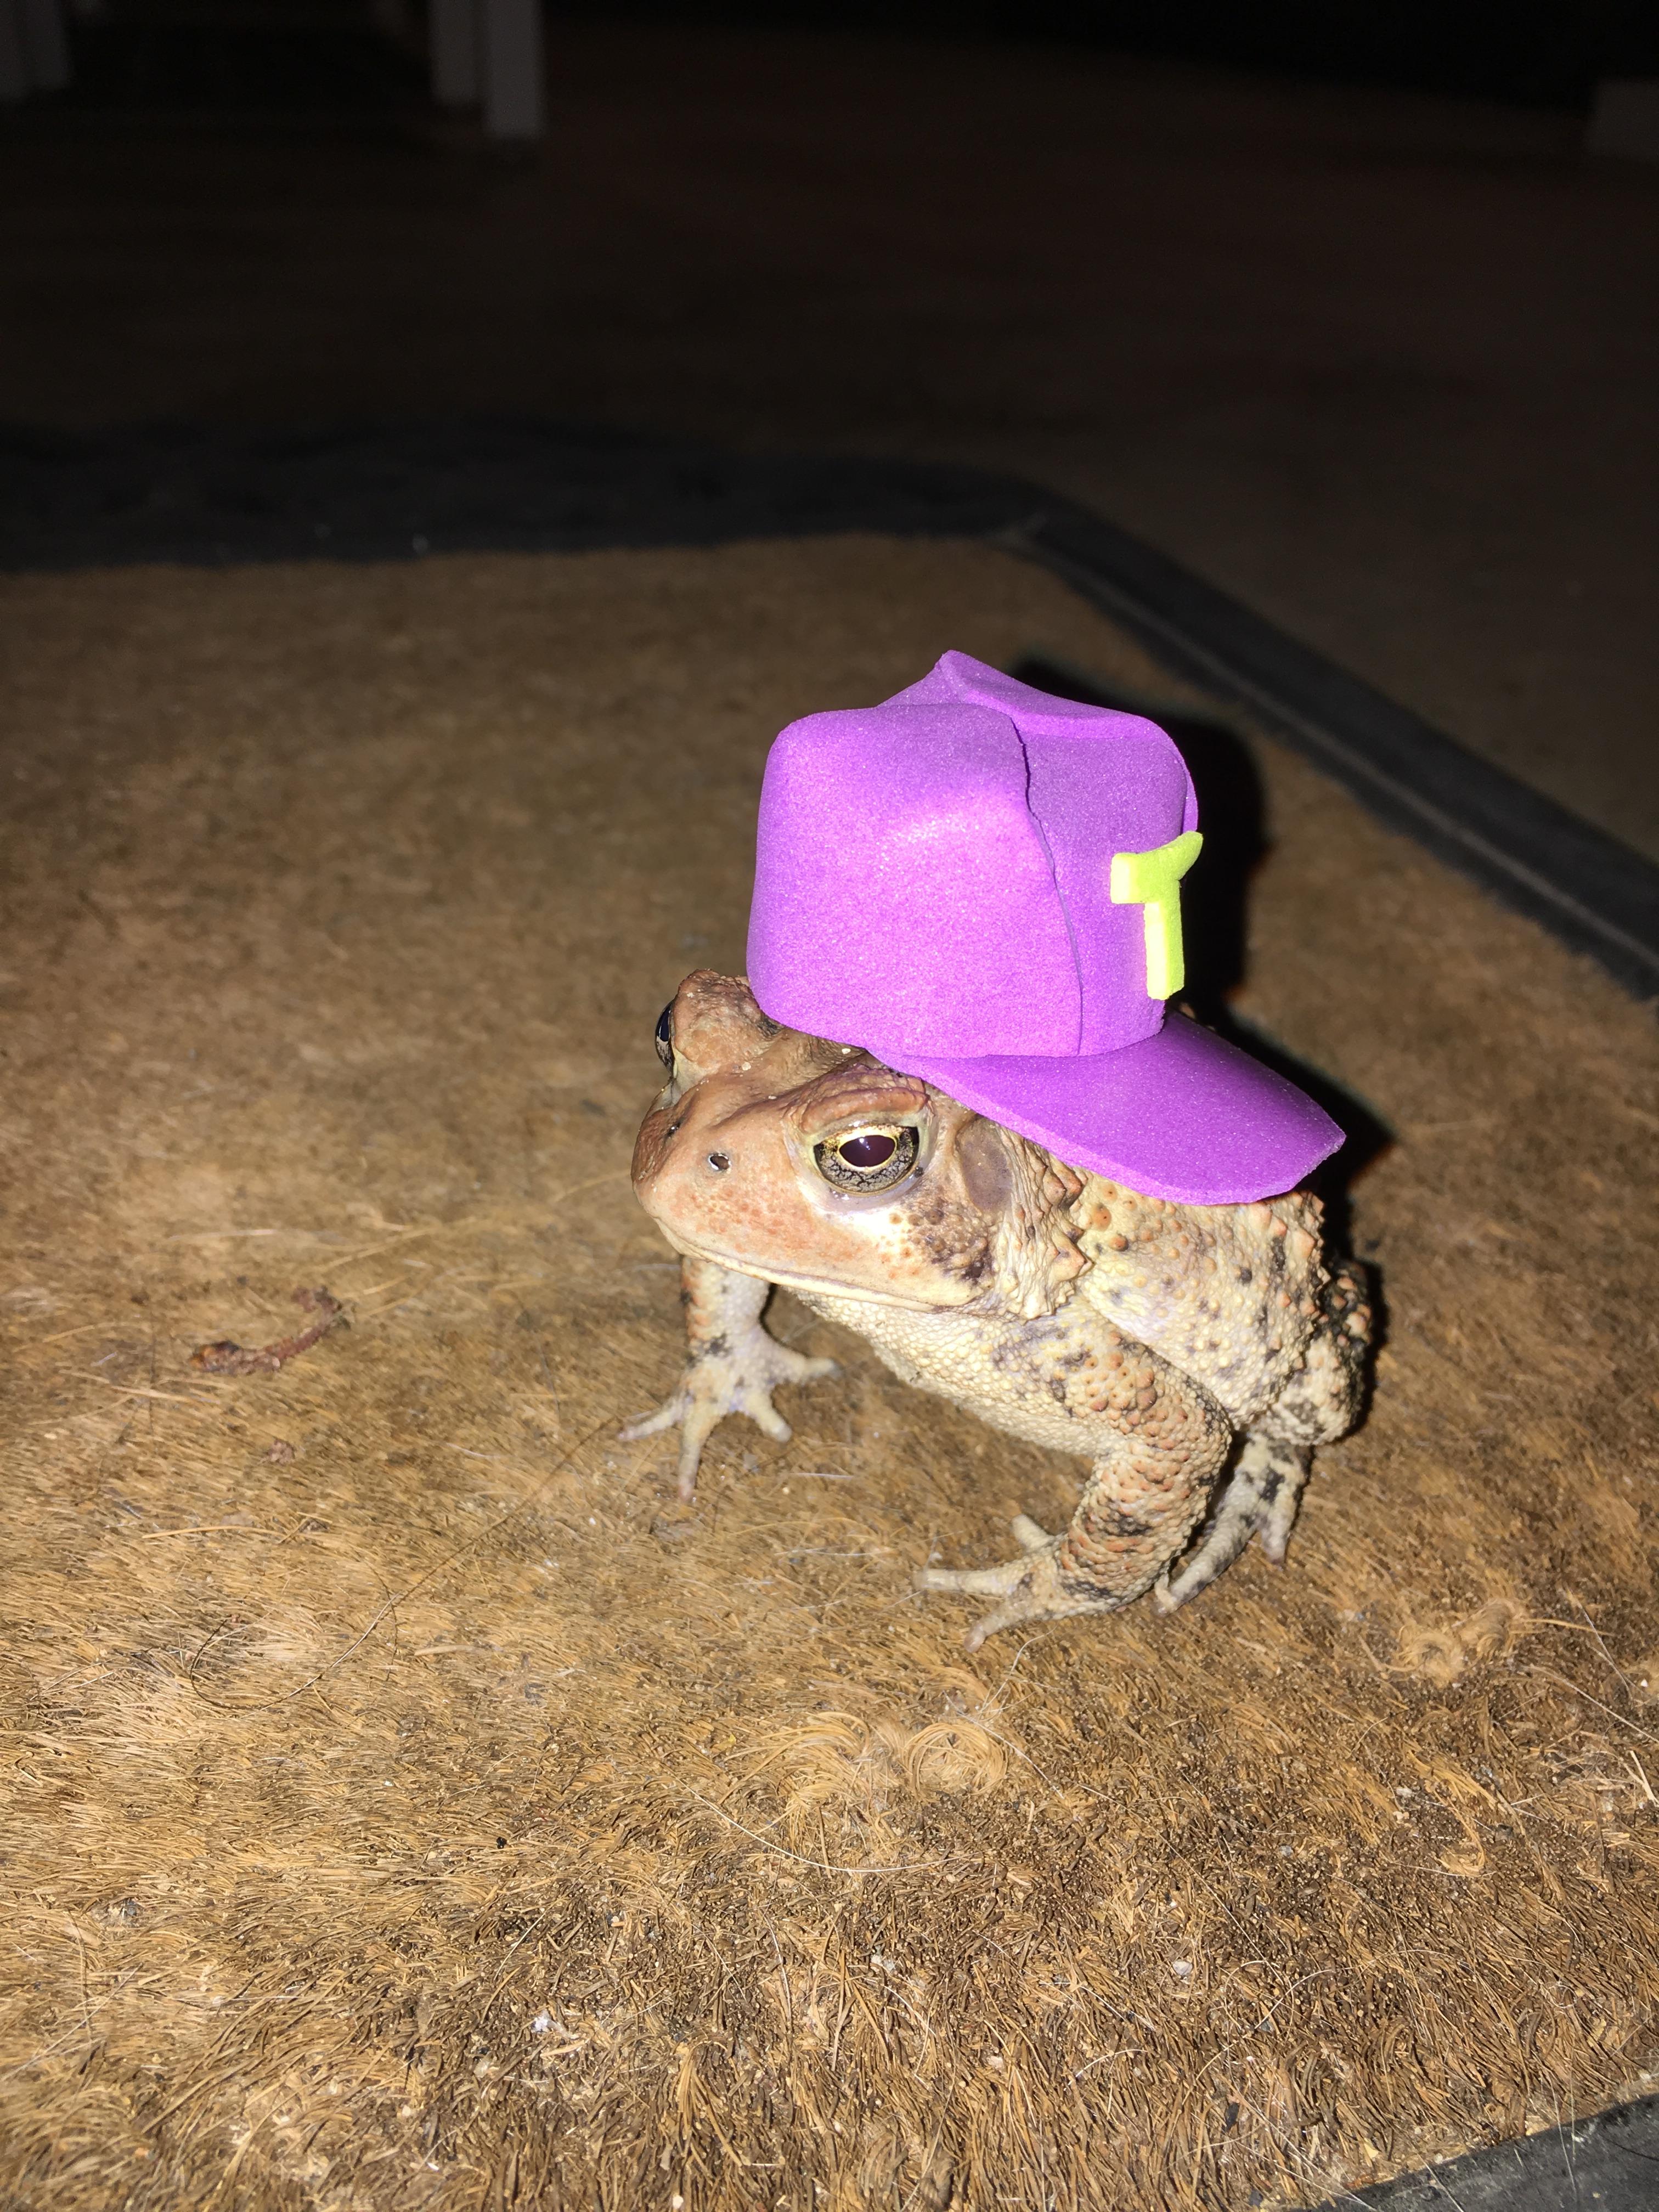 Man makes cute hats for toad that visits his porch 5